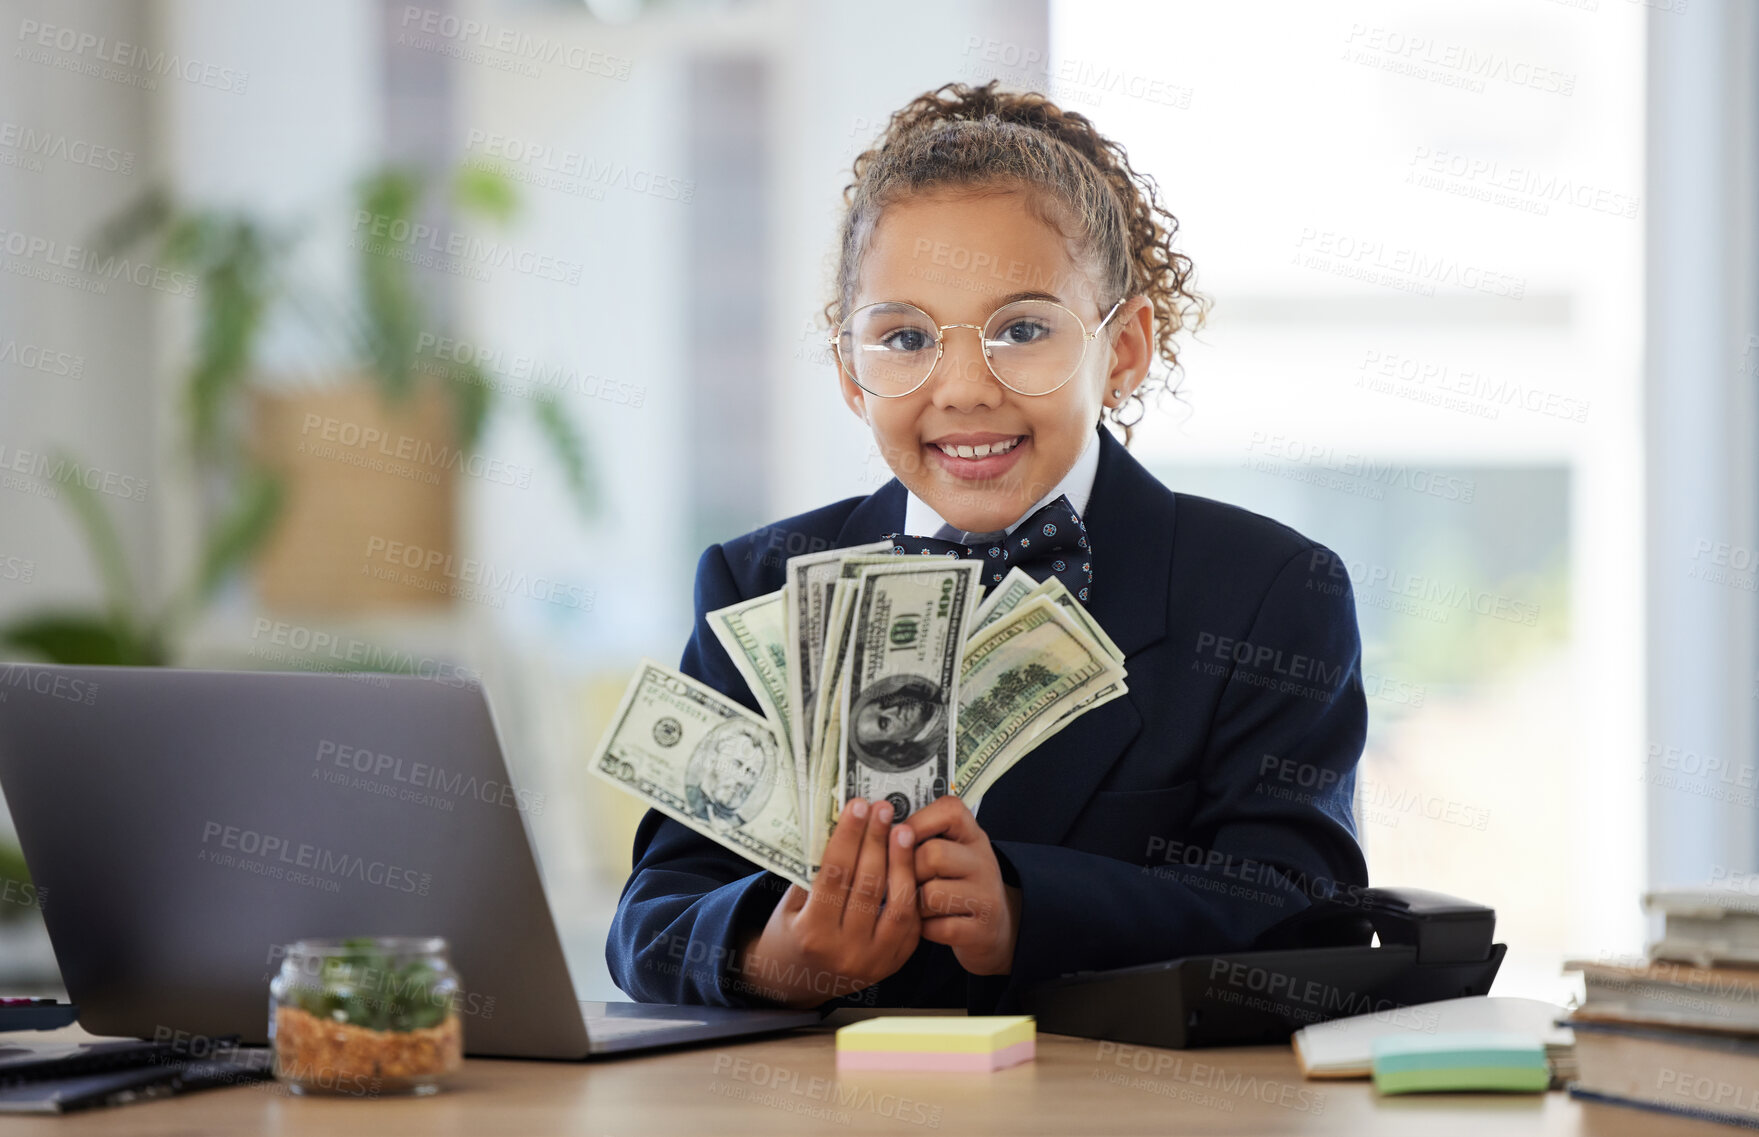 Buy stock photo Business, portrait of girl child and cash, smile and glasses, education in money management or budget planning. Happy corporate kid in suit, saving and investing in future finance with kids in office